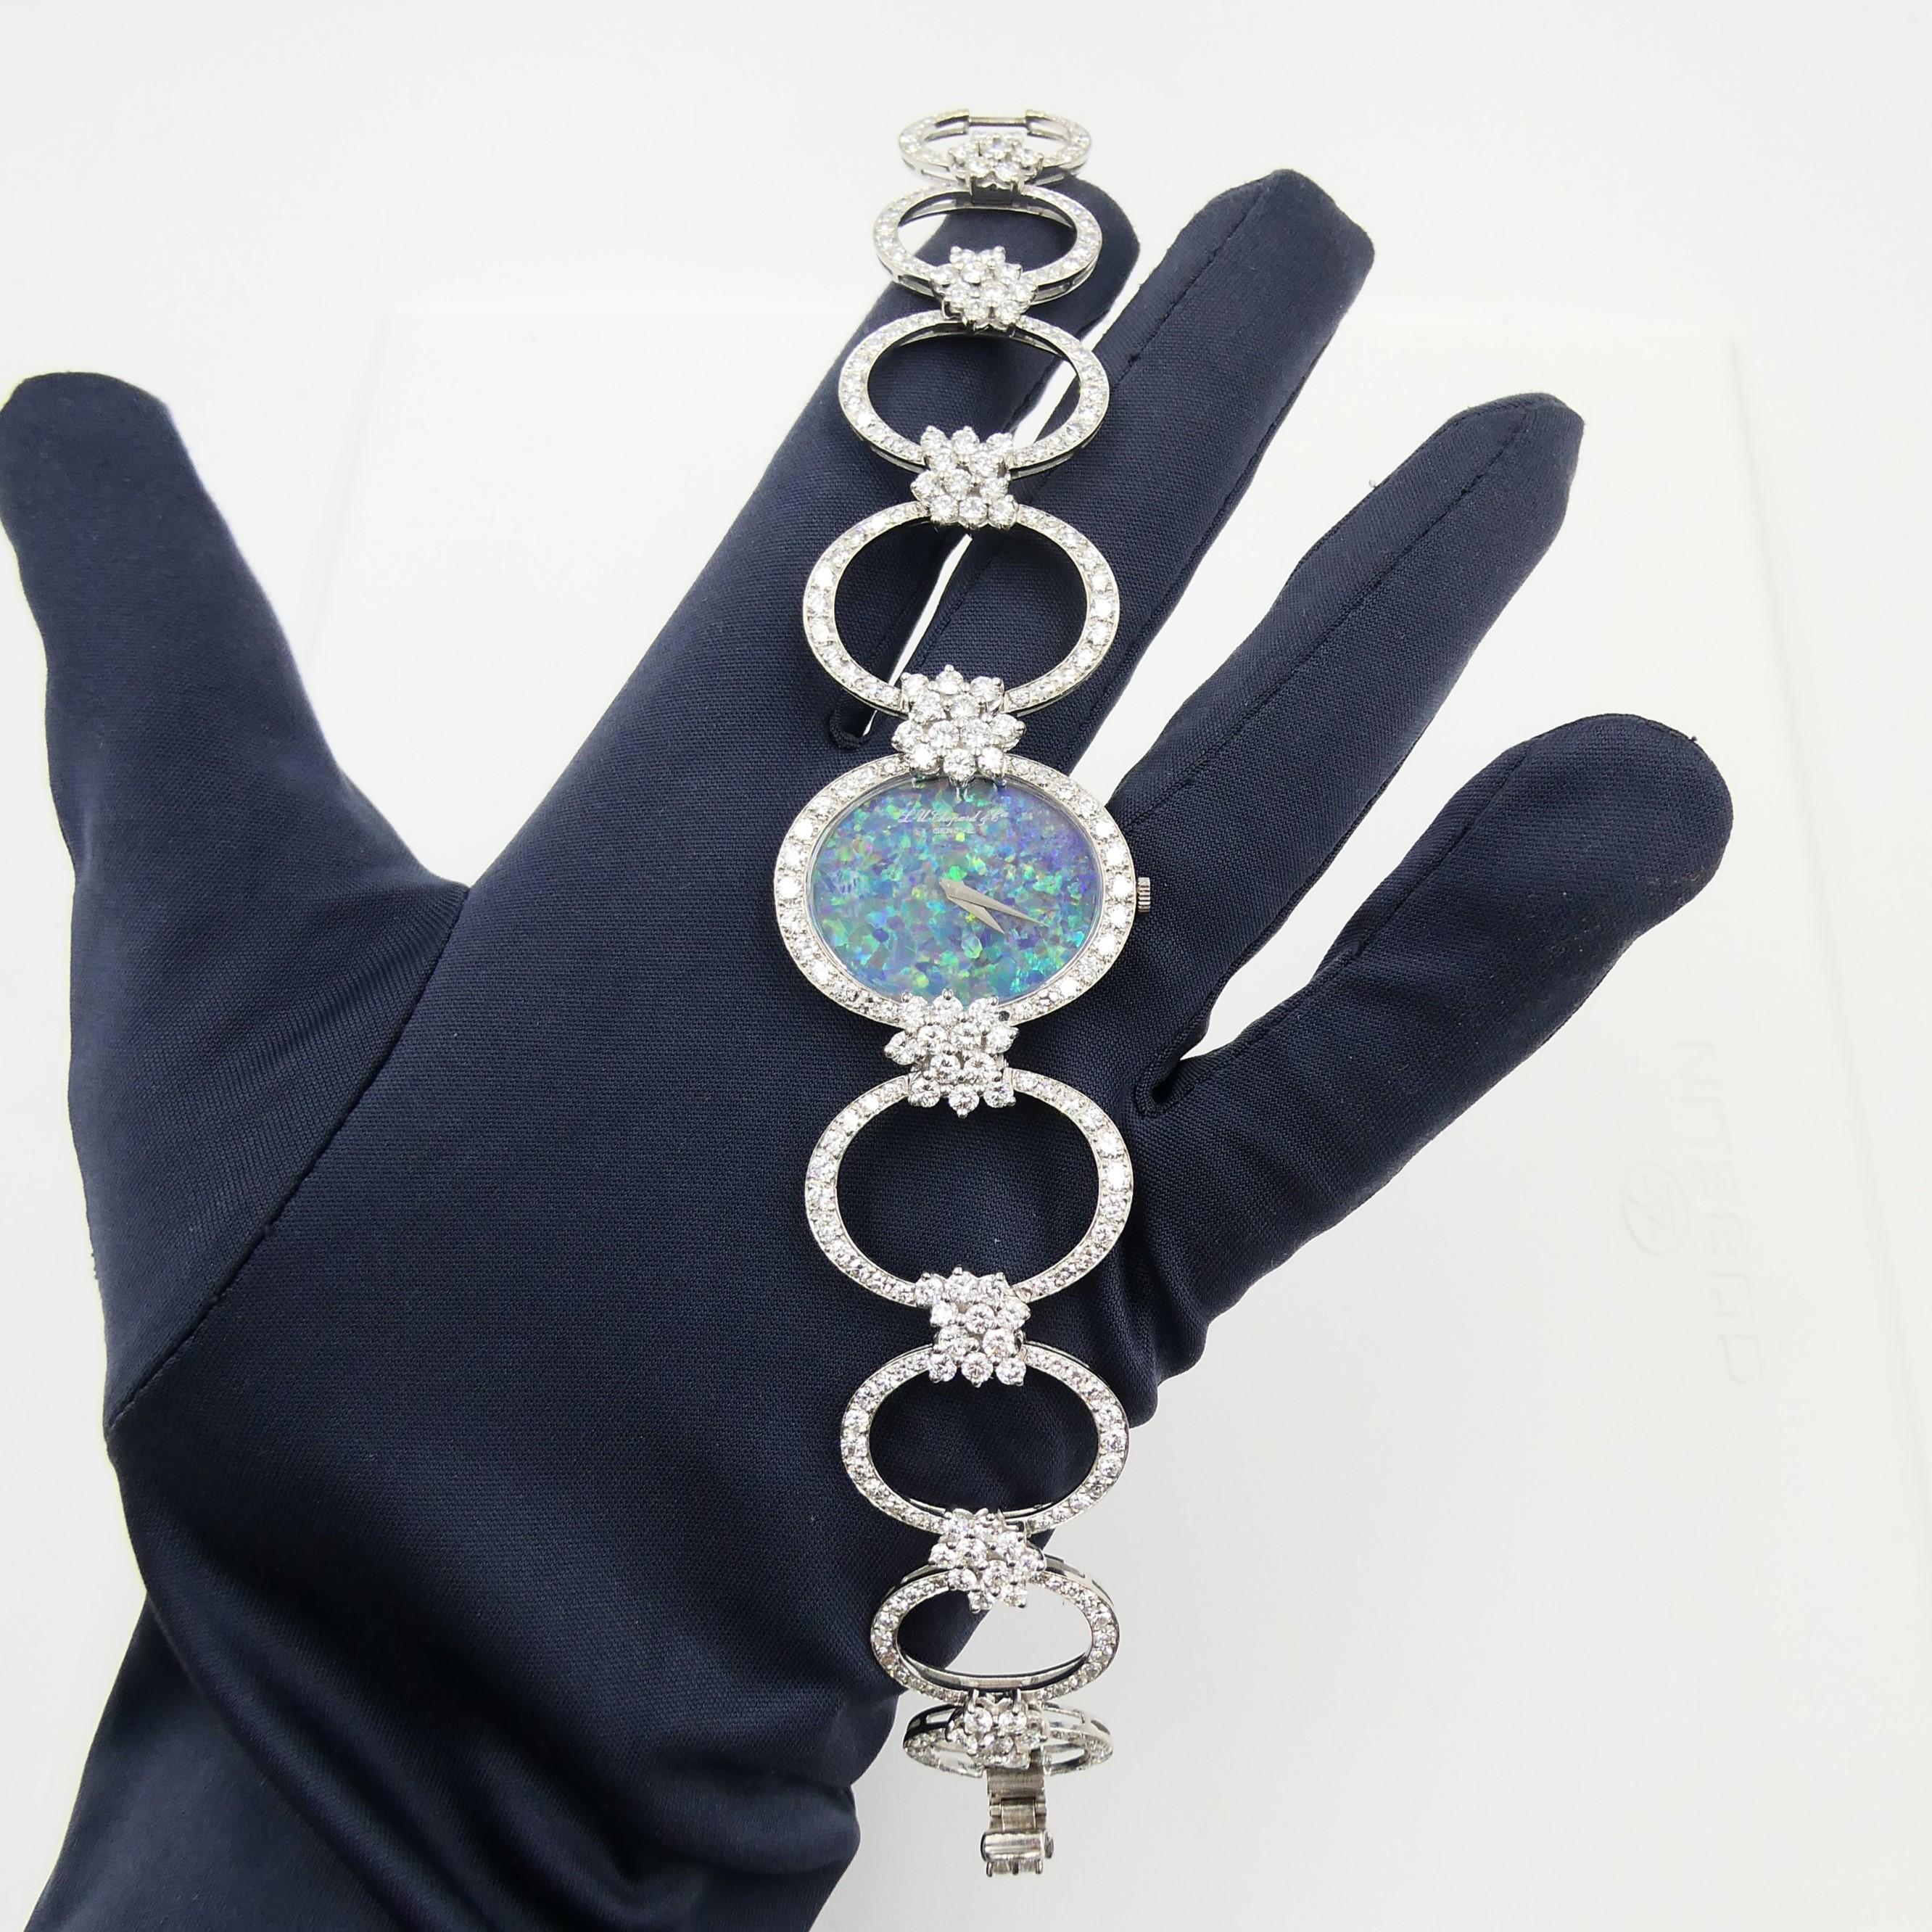 Brilliant Cut Chopard Watch with Black Opal and Diamond in 18 Karat White Gold